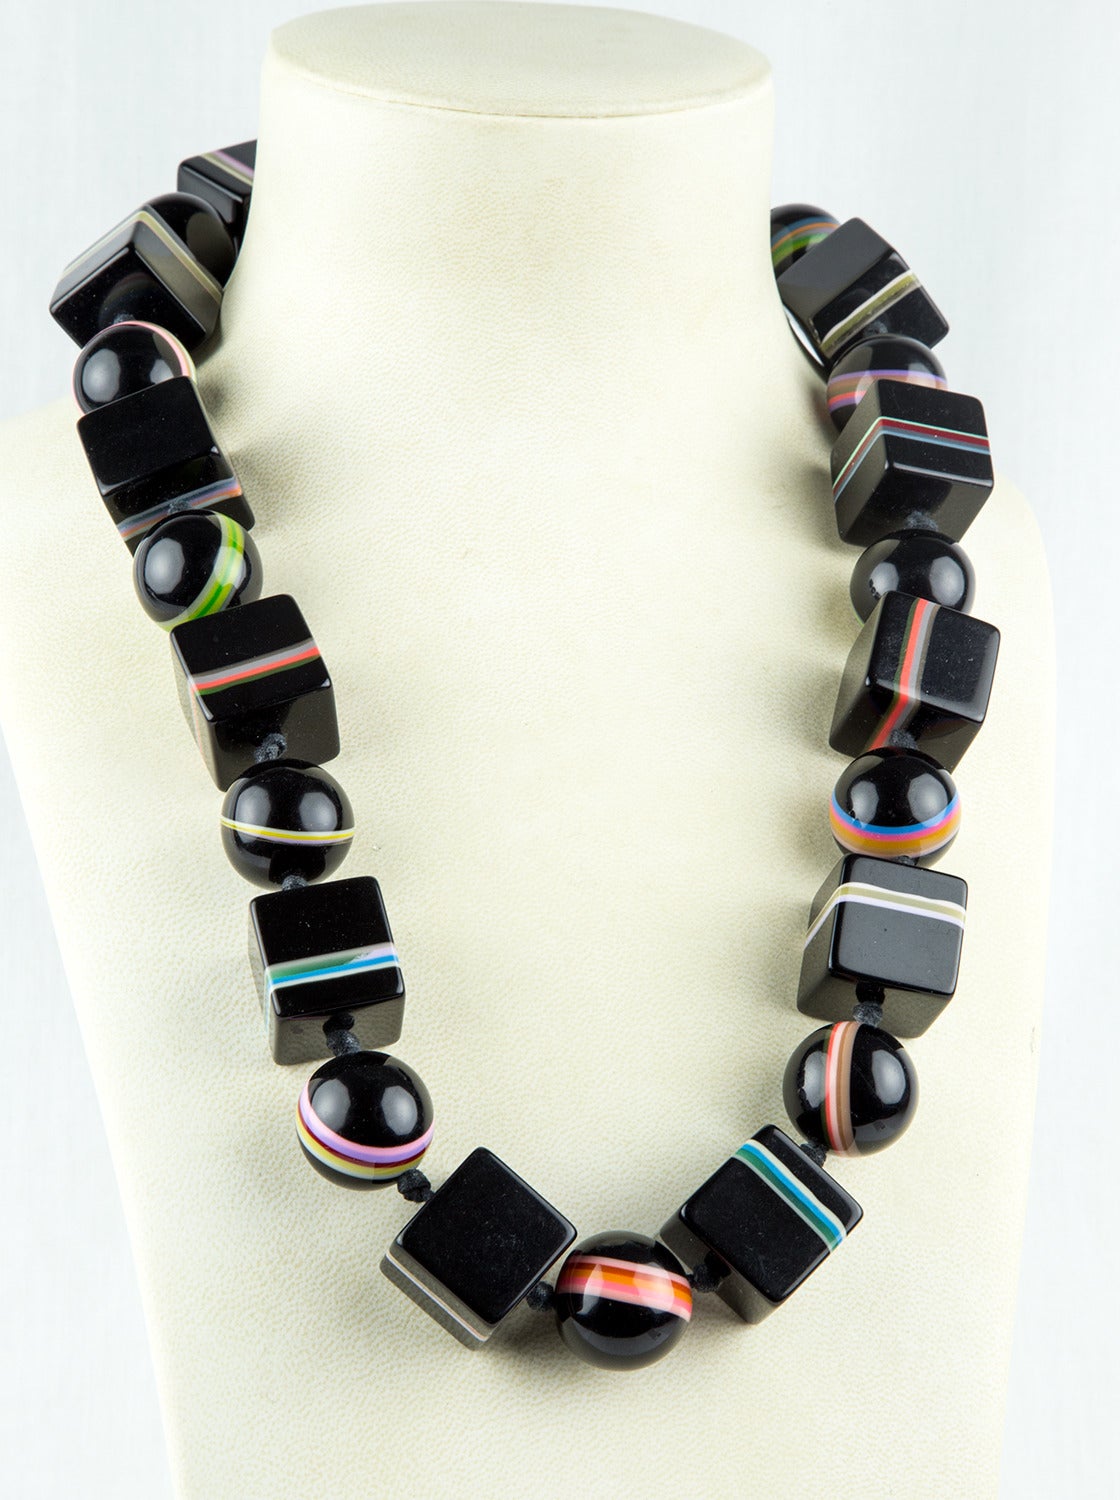 Dynamic Chunky Necklace comprised of large Black Square 24mm Cube and 24mm round Beads with banding, the colors of the Rainbow. Approx. total length: 28”. Classic and Dramatic!